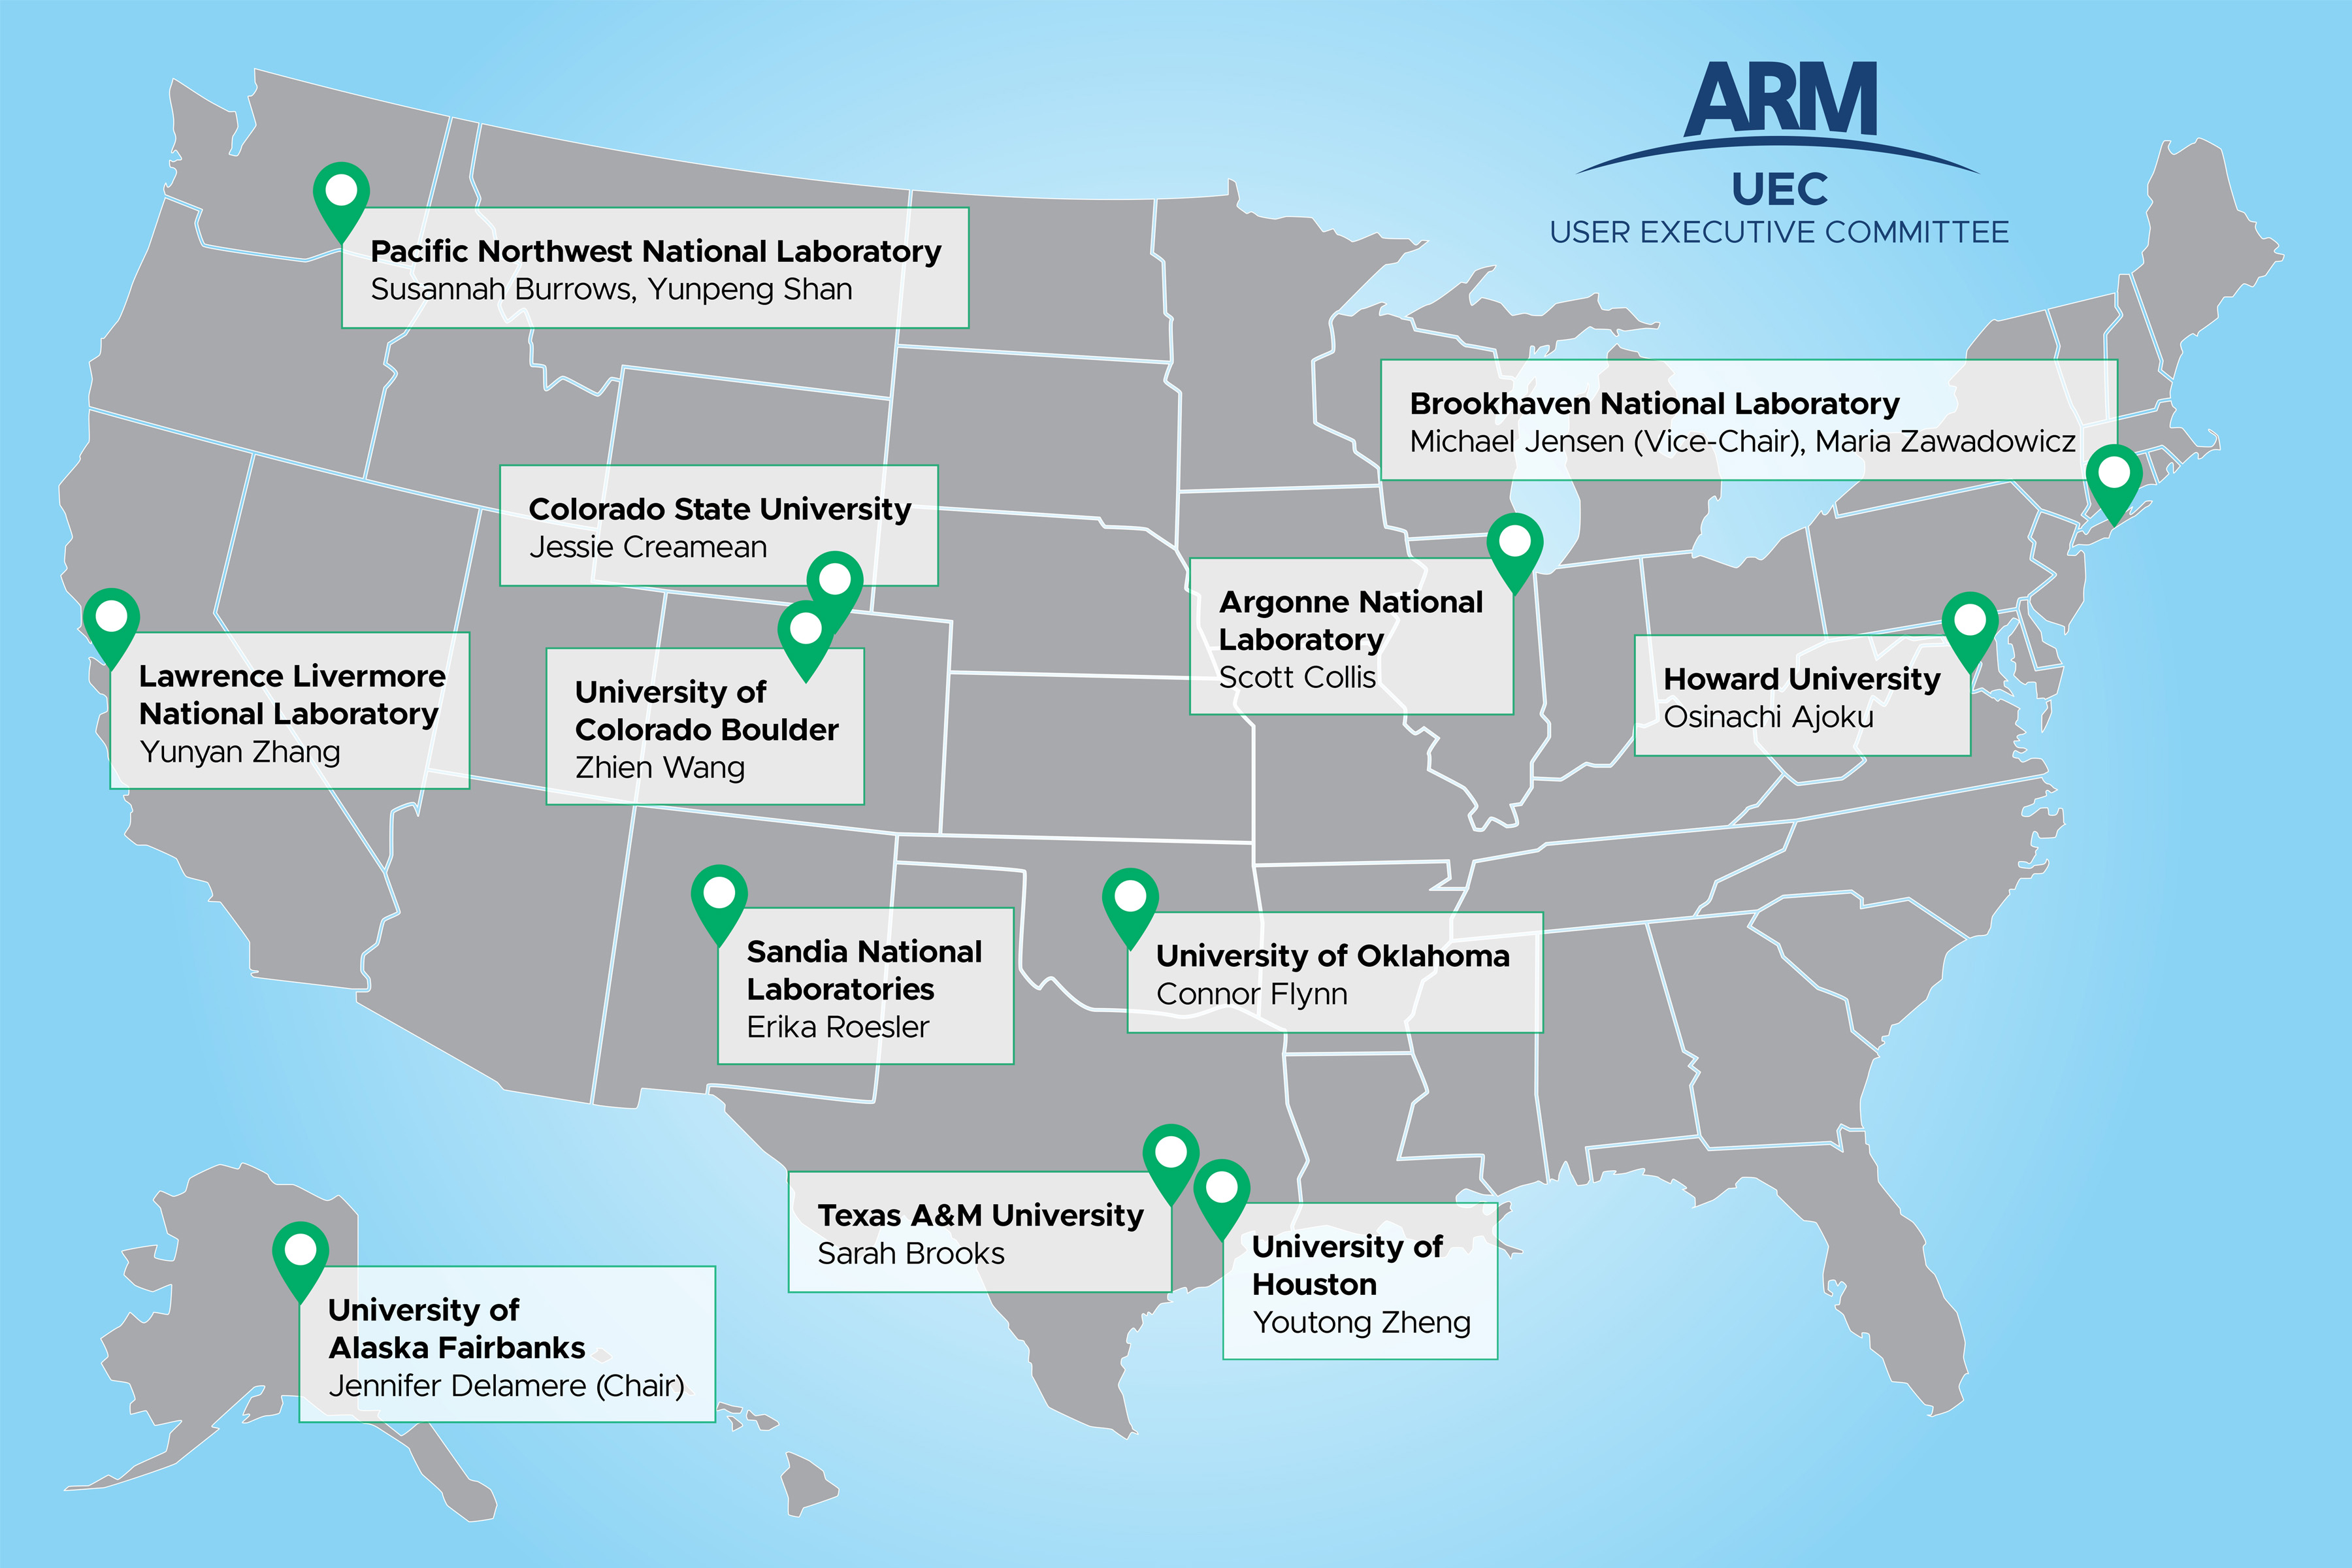 Map showing locations of ARM UEC members